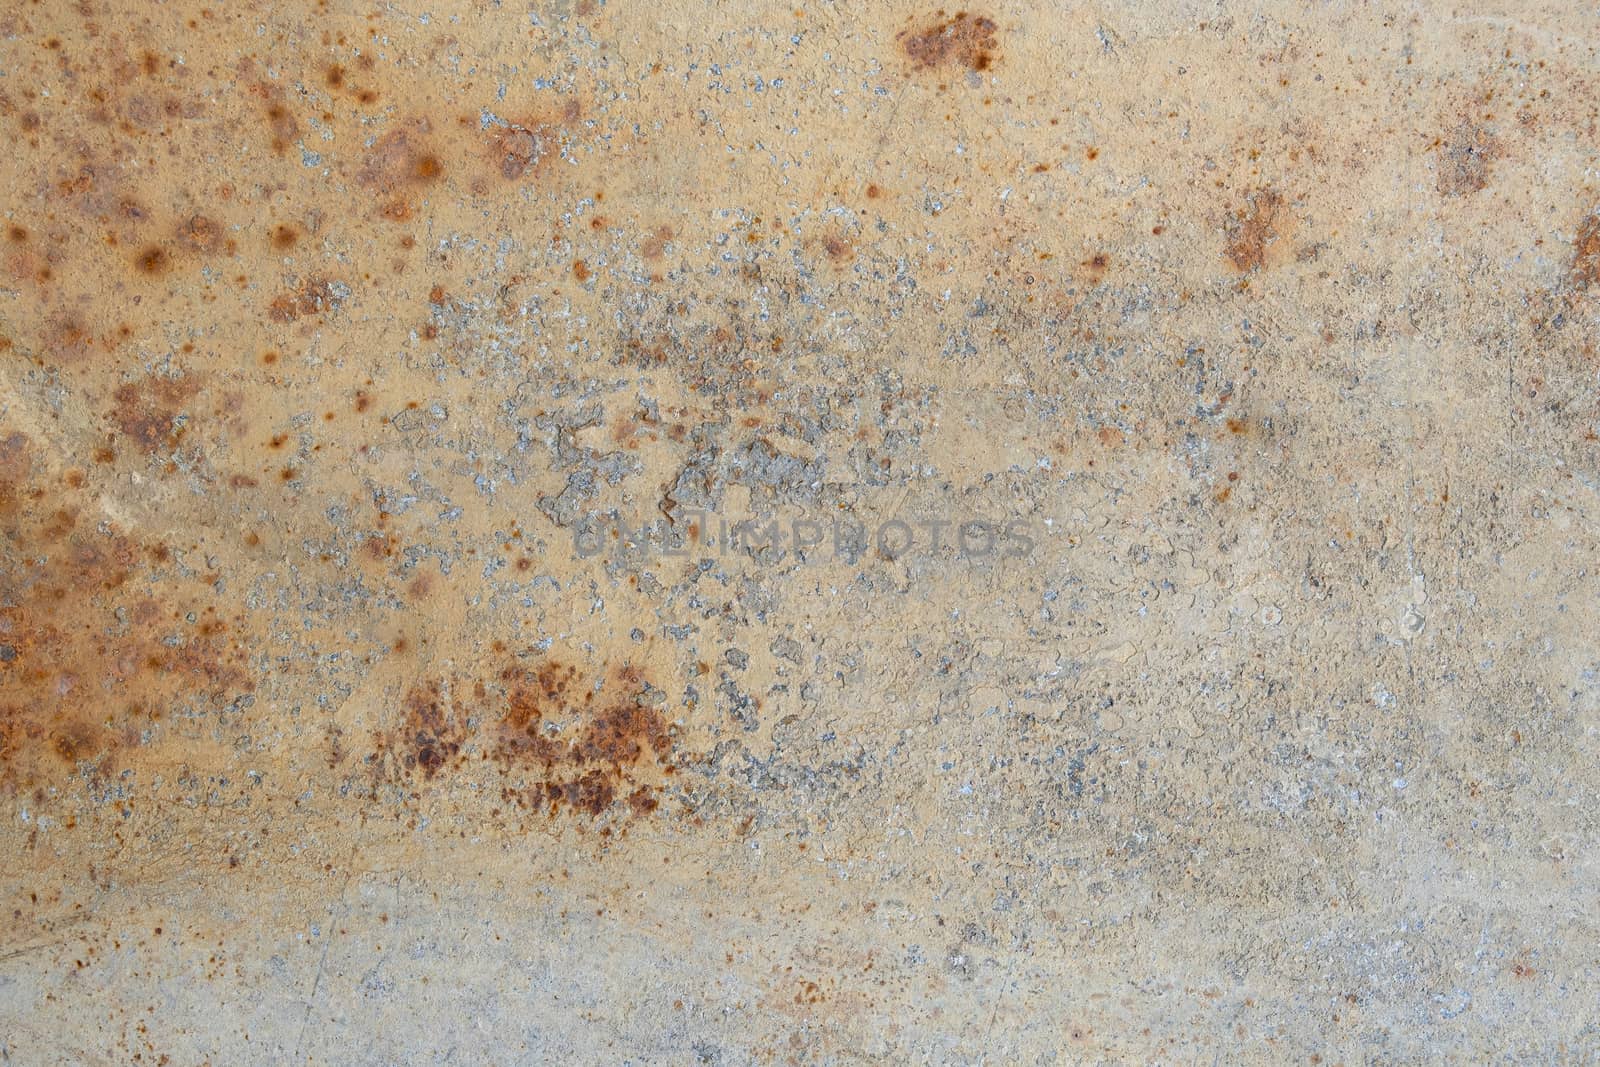 Dirty corrosive and rusty metal textured background